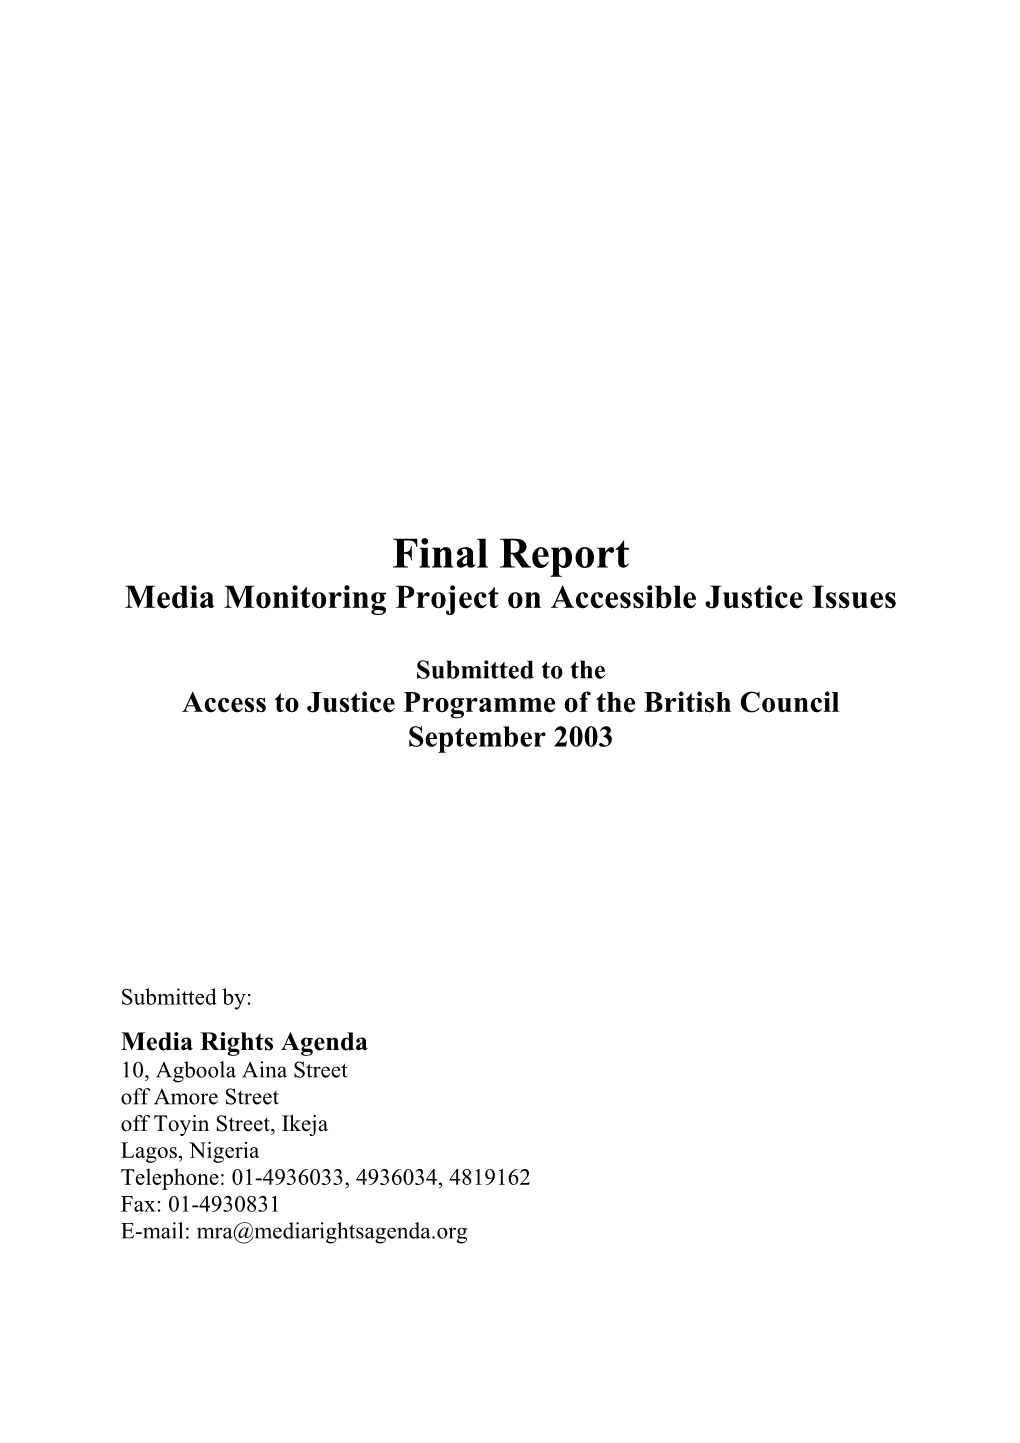 Final Report Media Monitoring Project on Accessible Justice Issues